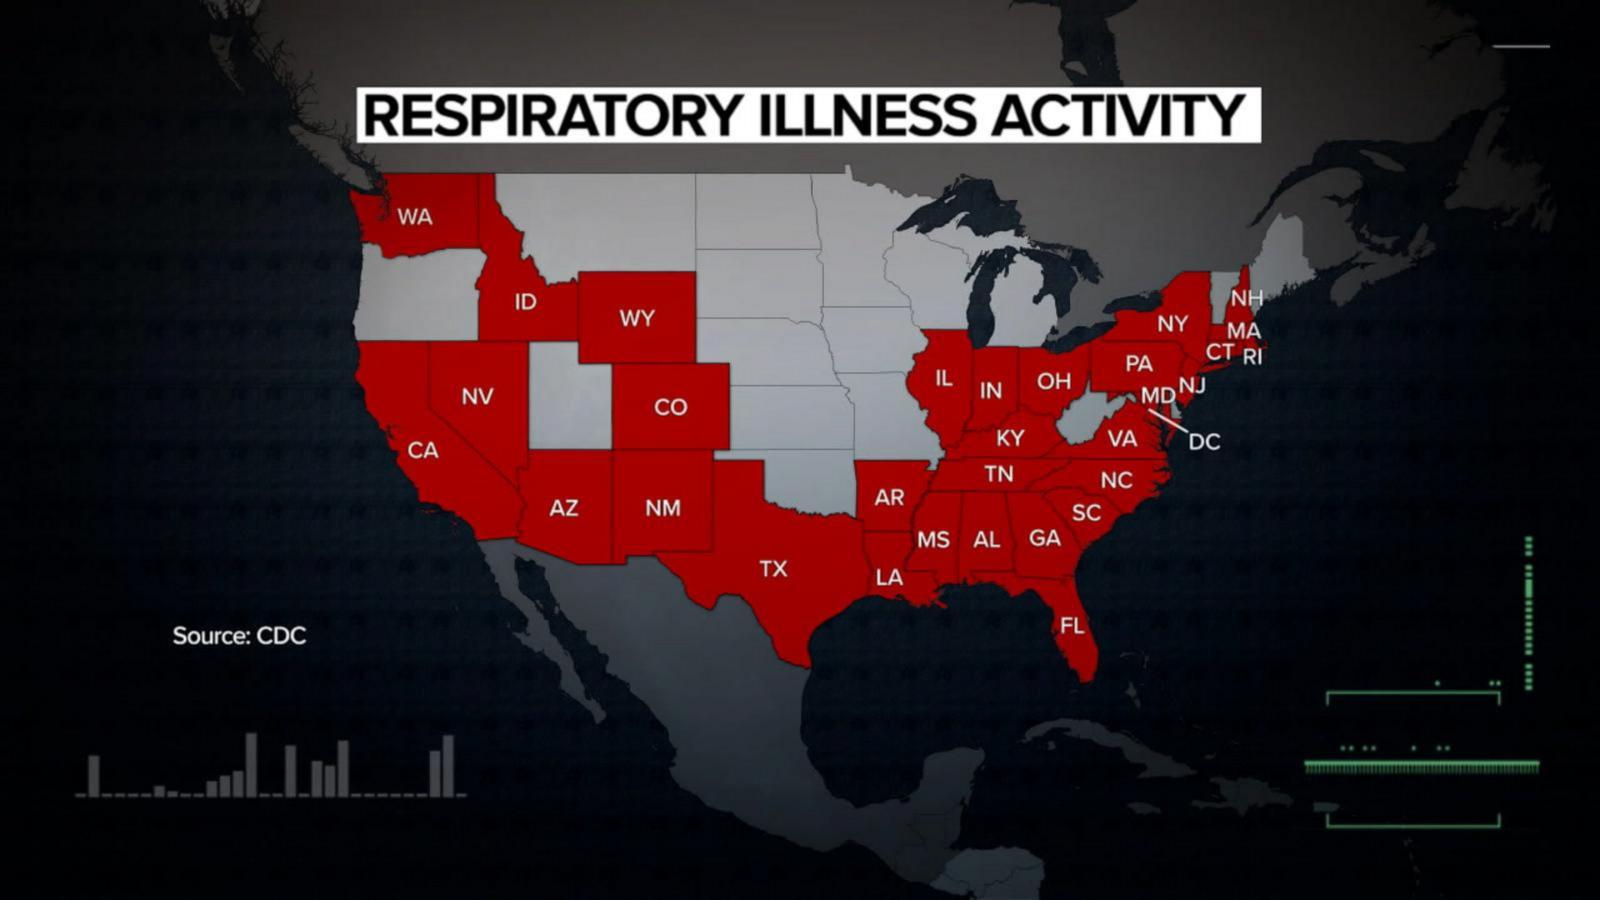 VIDEO: Indoor mask requirements reinstated in hospitals in 9 states and NYC